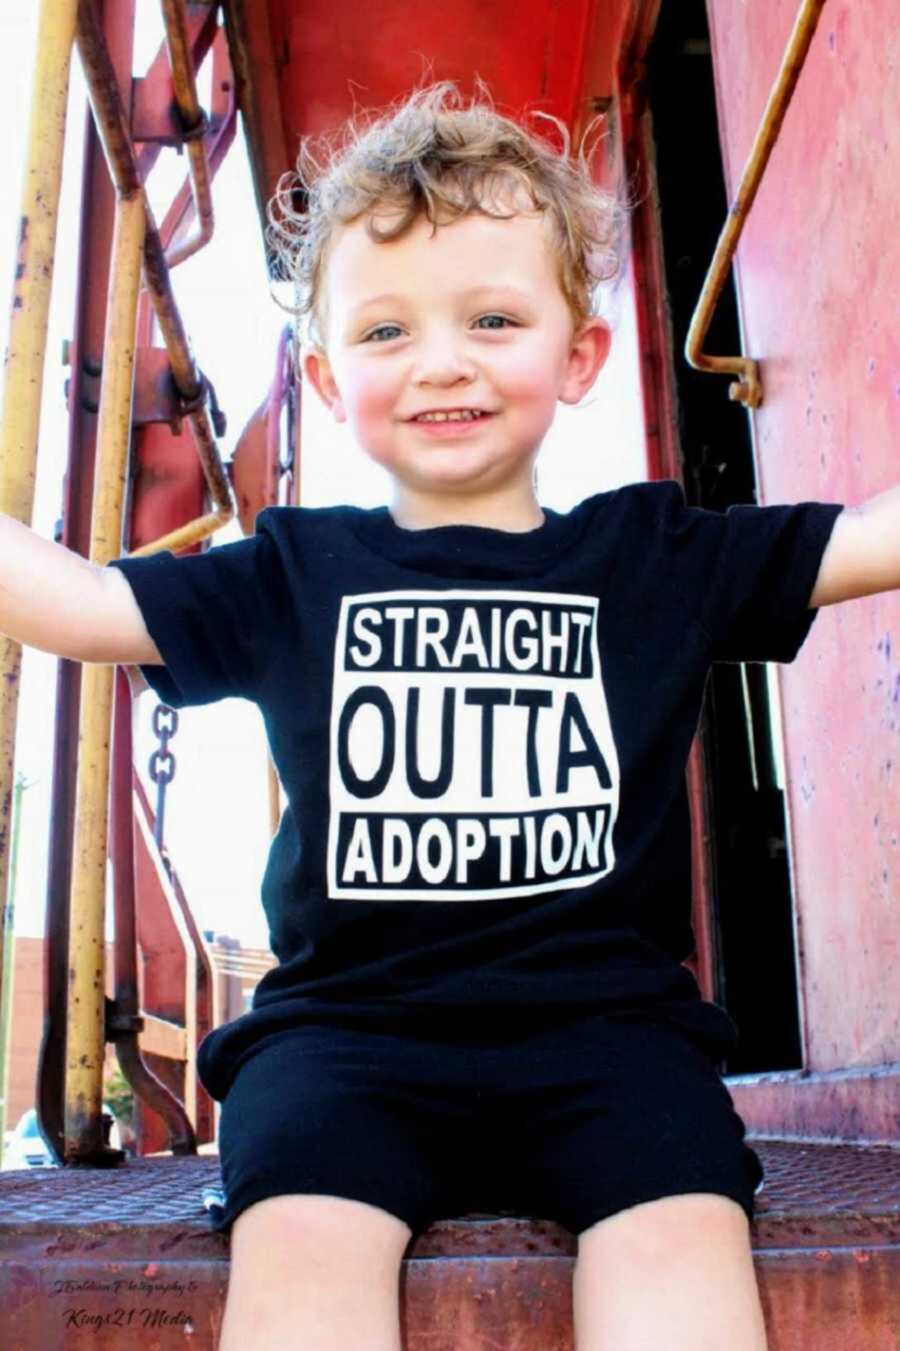 Adopted toddler wearing "straight outta adoption" shirt